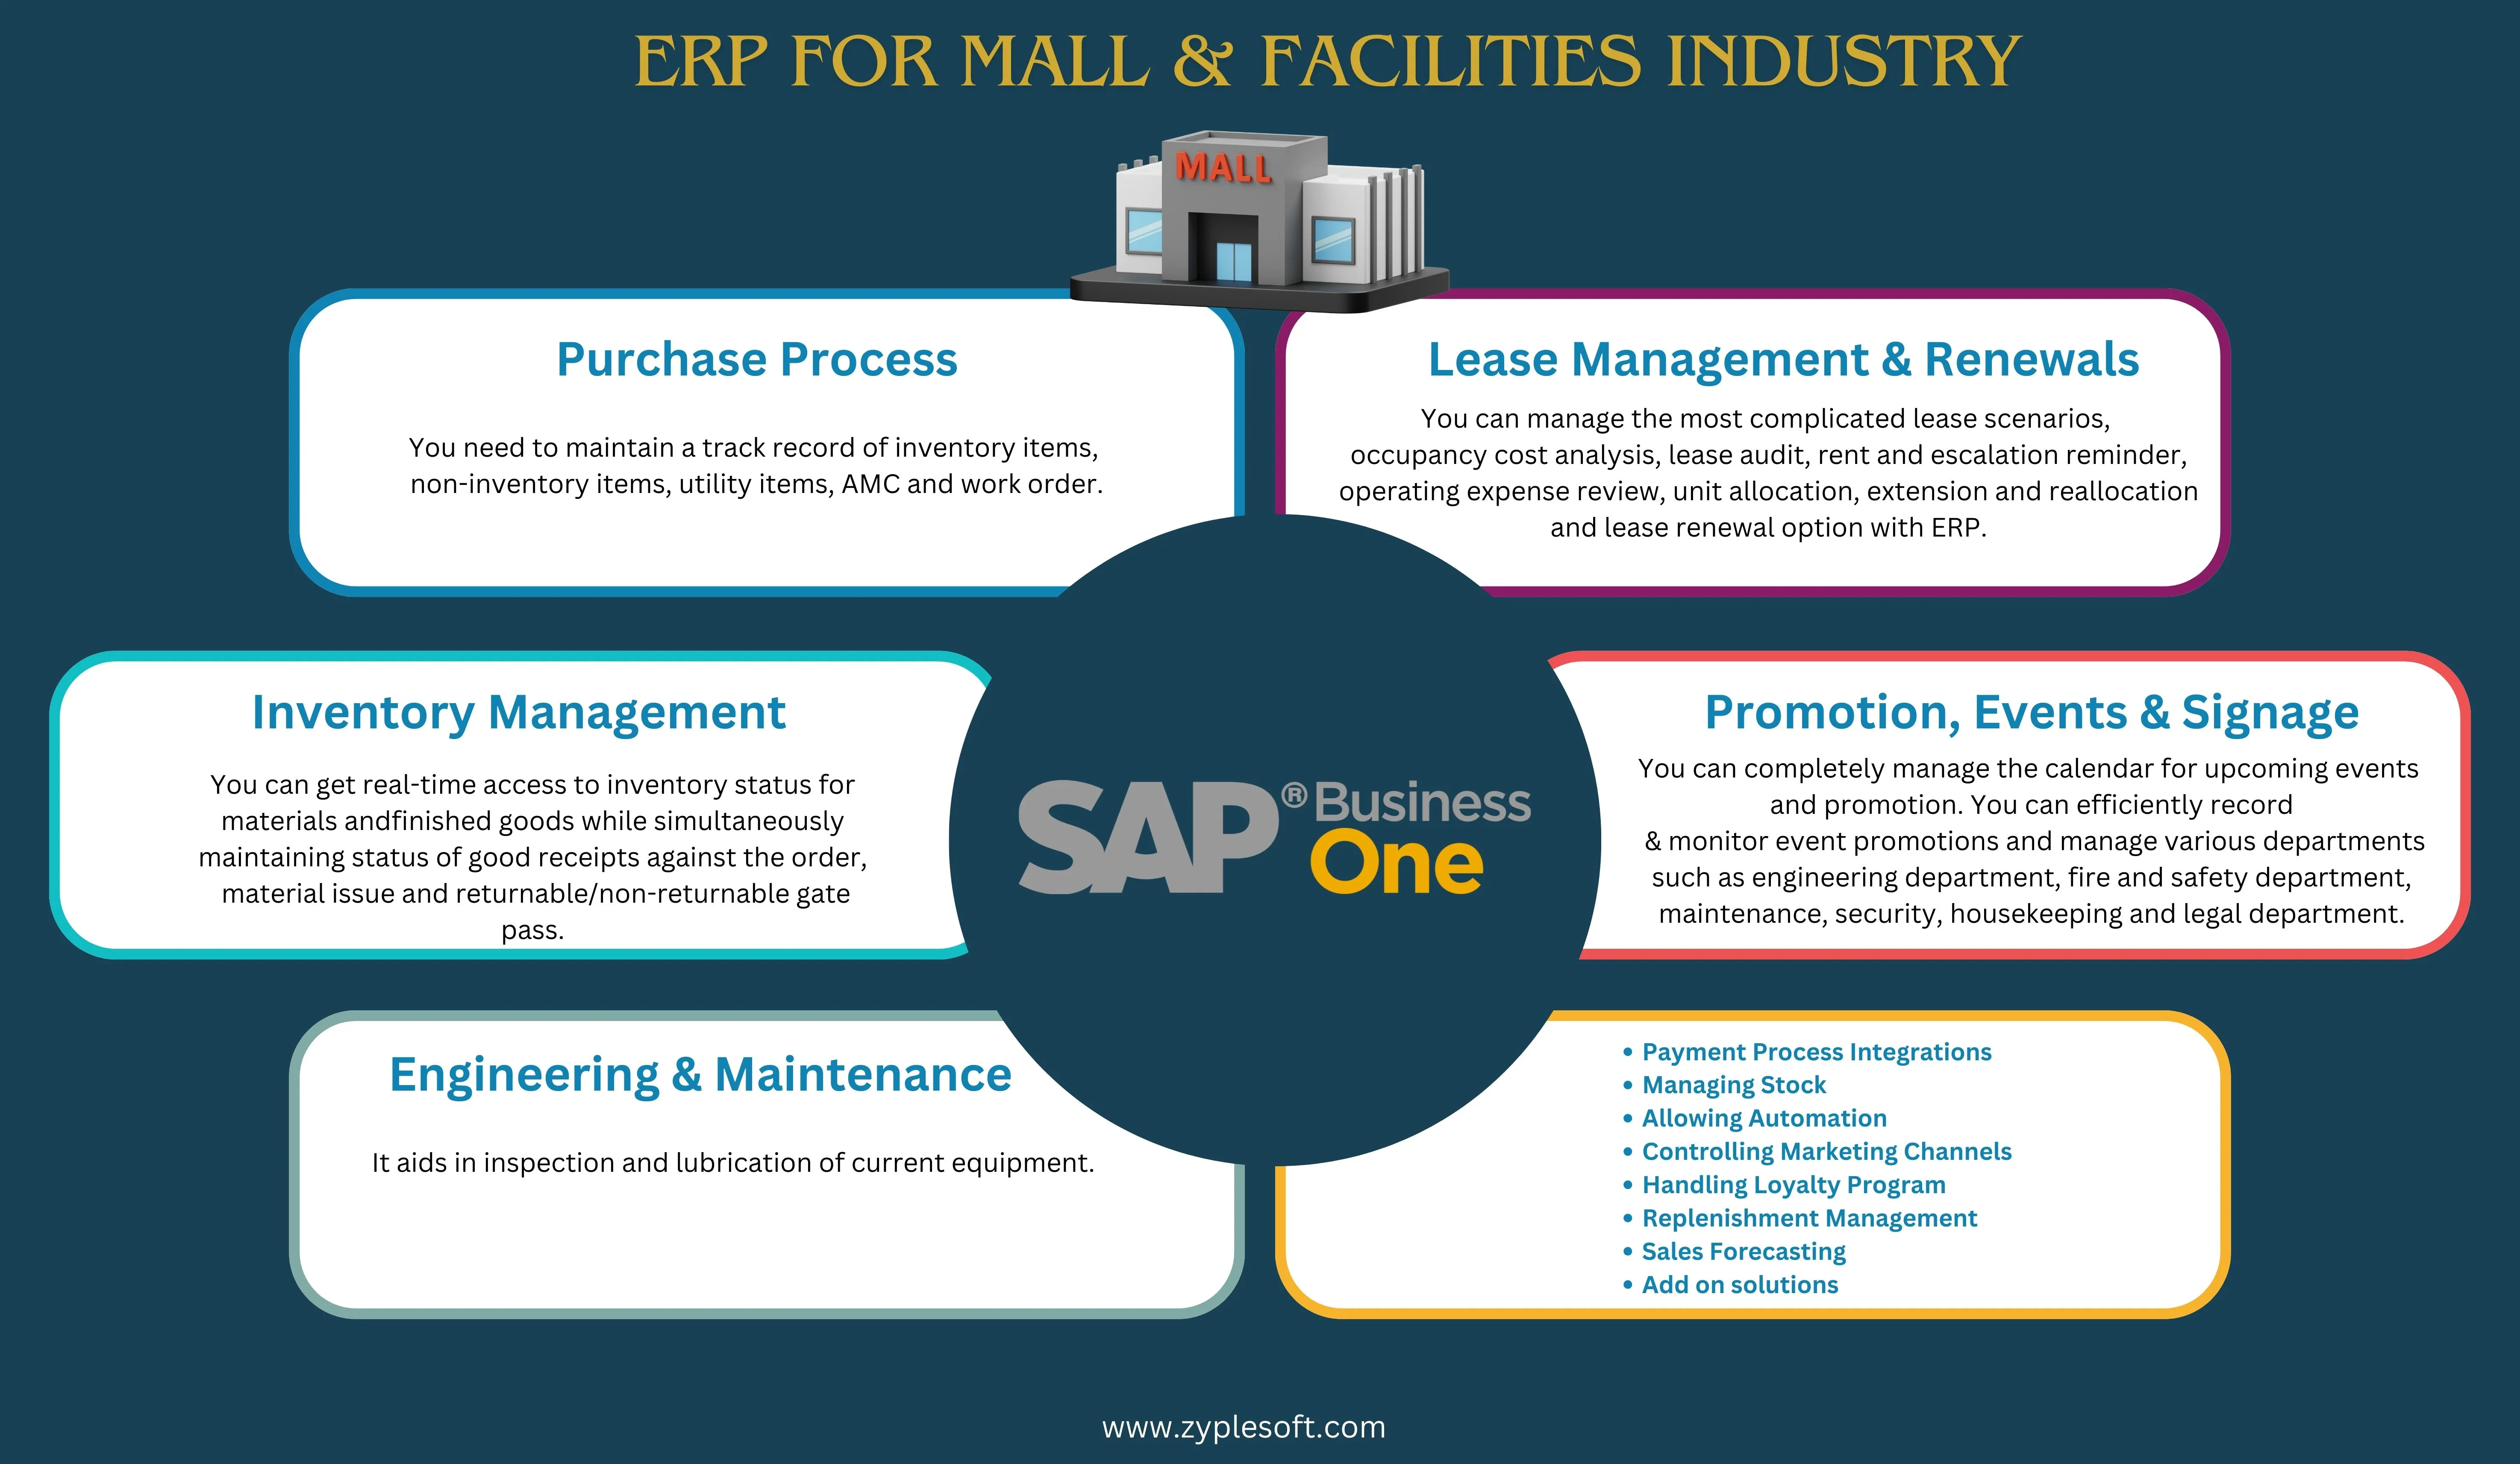 SAP Business One ERP for Mall & Facilities Industry